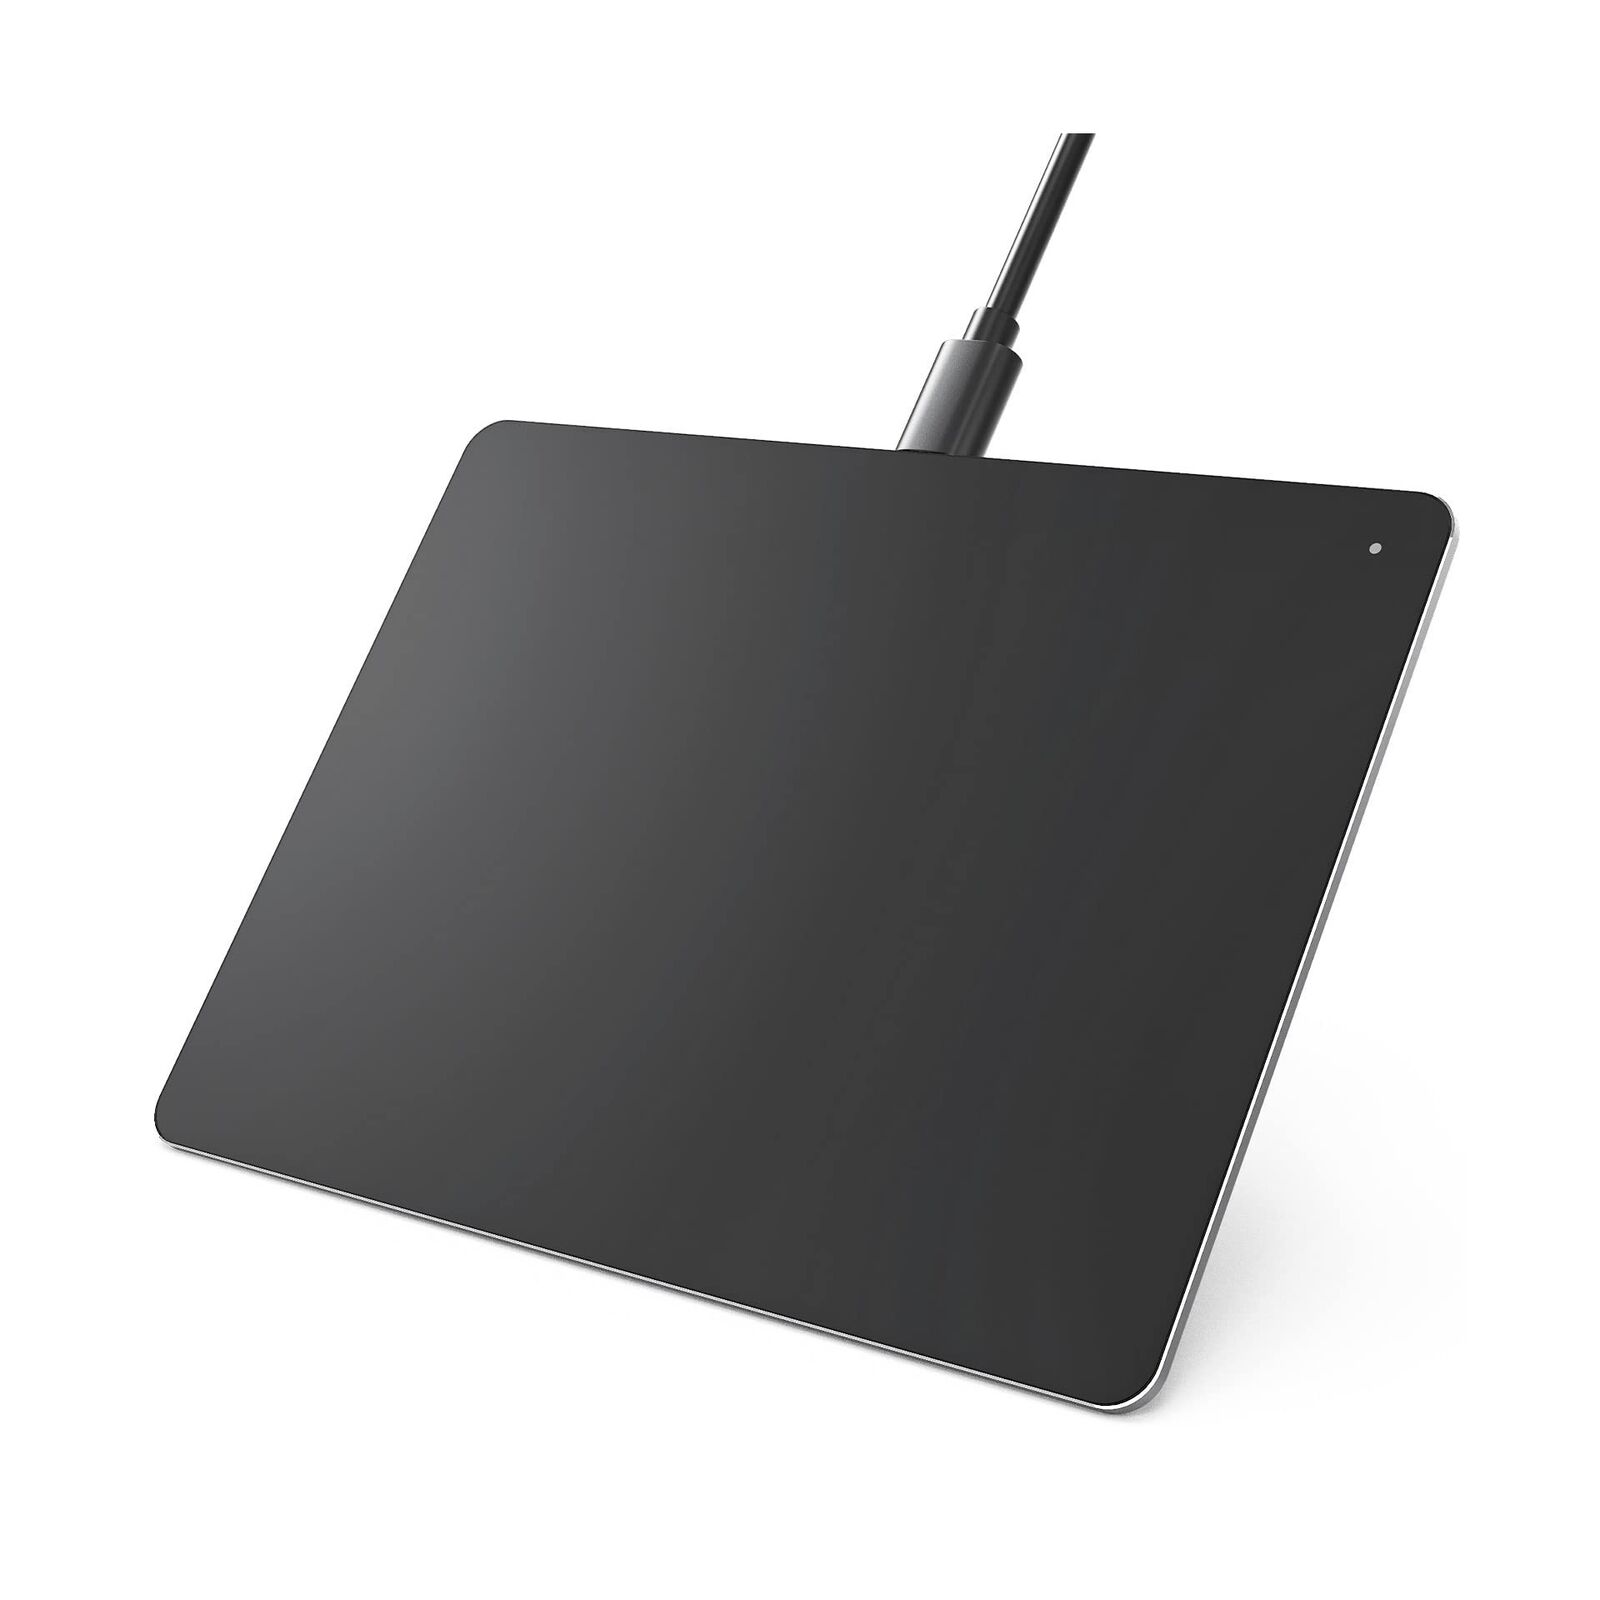 Trackpad Touchpad for PC, Wired Ultra Slim Trackpad, Sensitive TouchPads with...